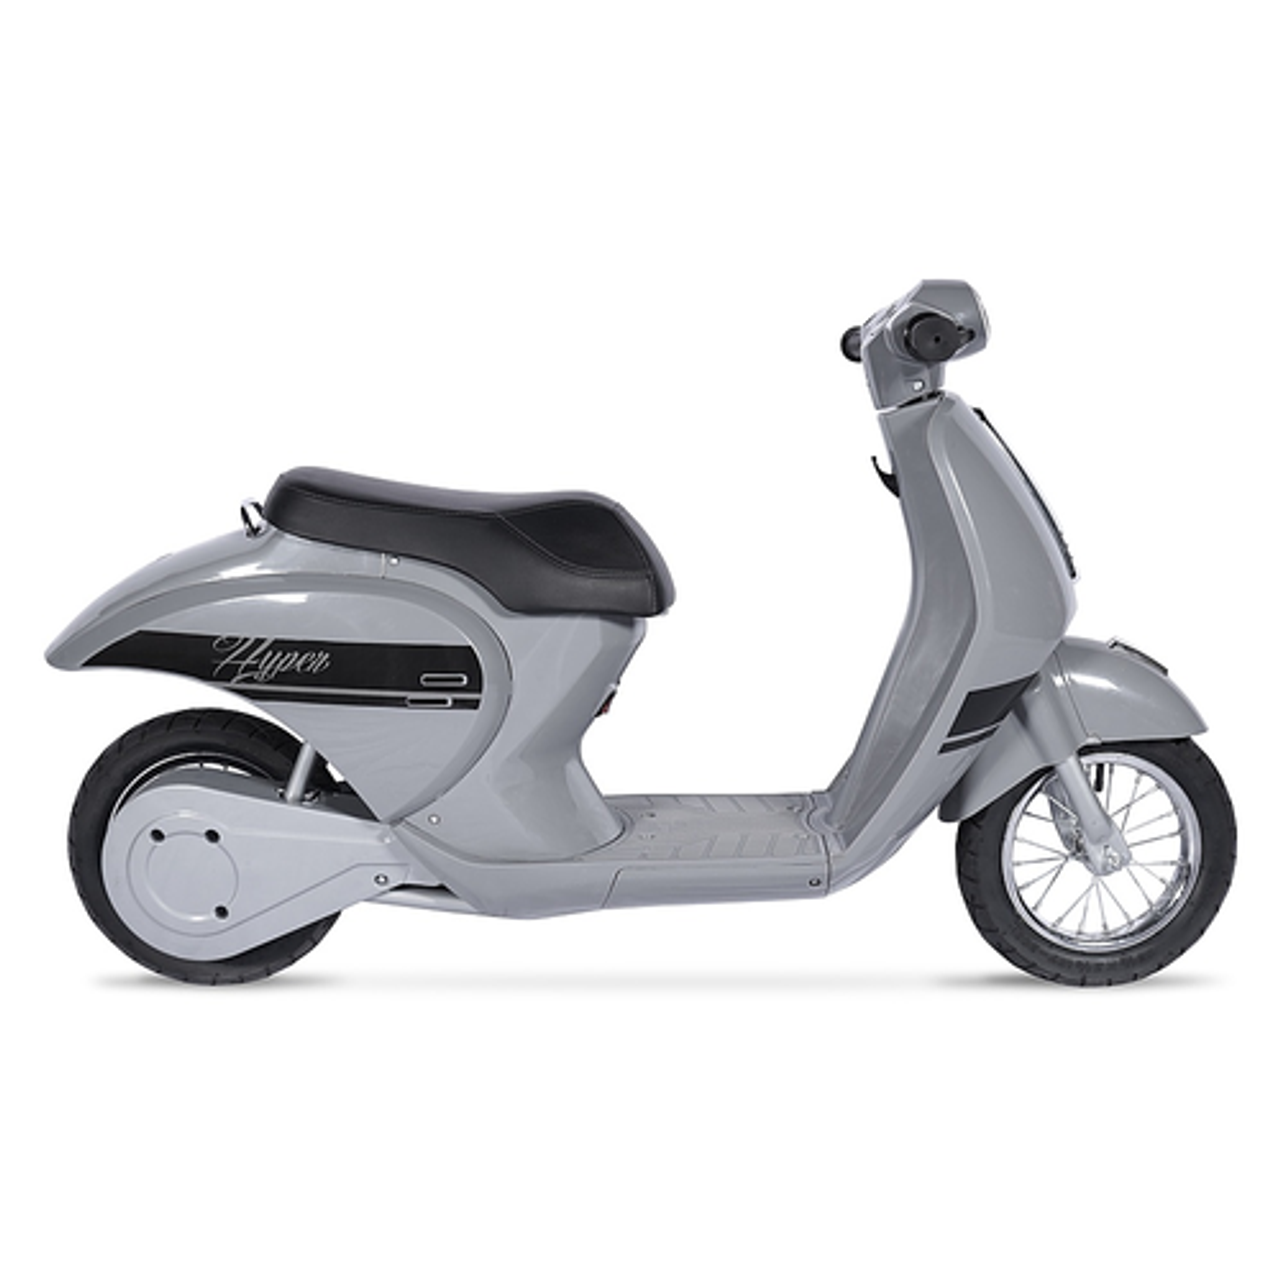 Hyper - 24V Retro Scooter, Powered Ride-on with Easy Twist Throttle, for Kids Ages 13 Years and Up - Silver